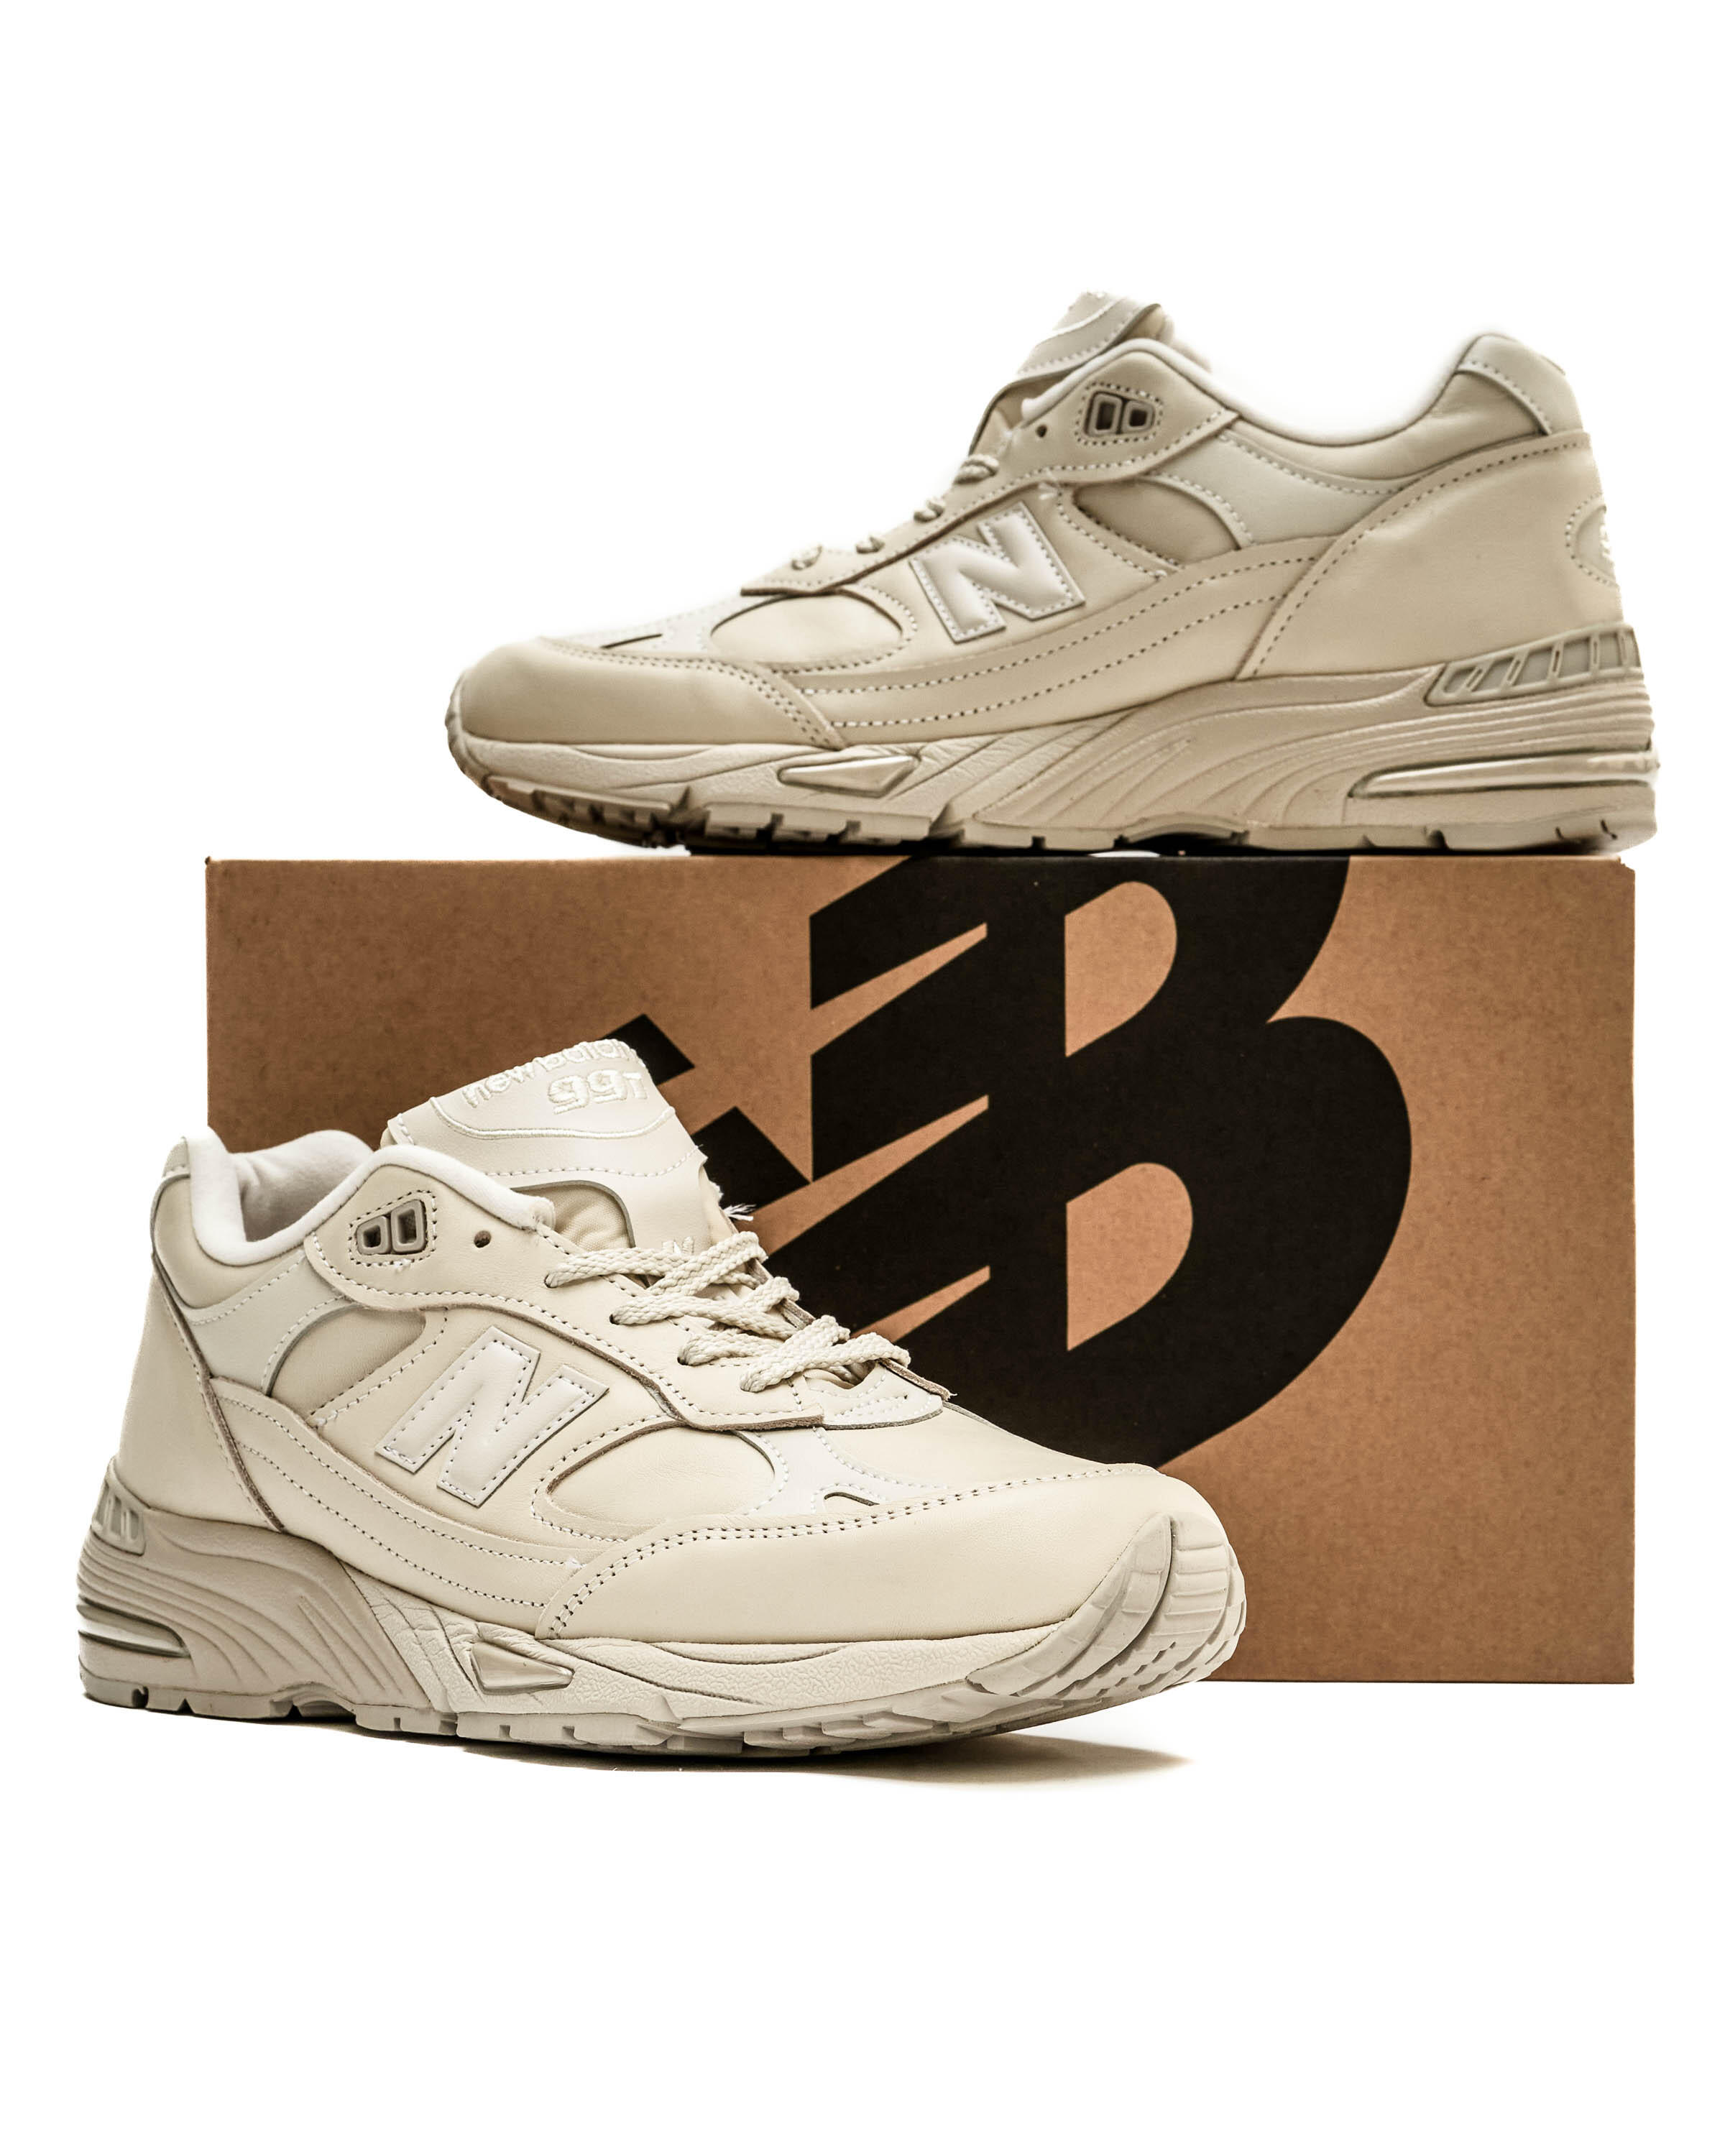 New Balance M 991 OW - Made in England